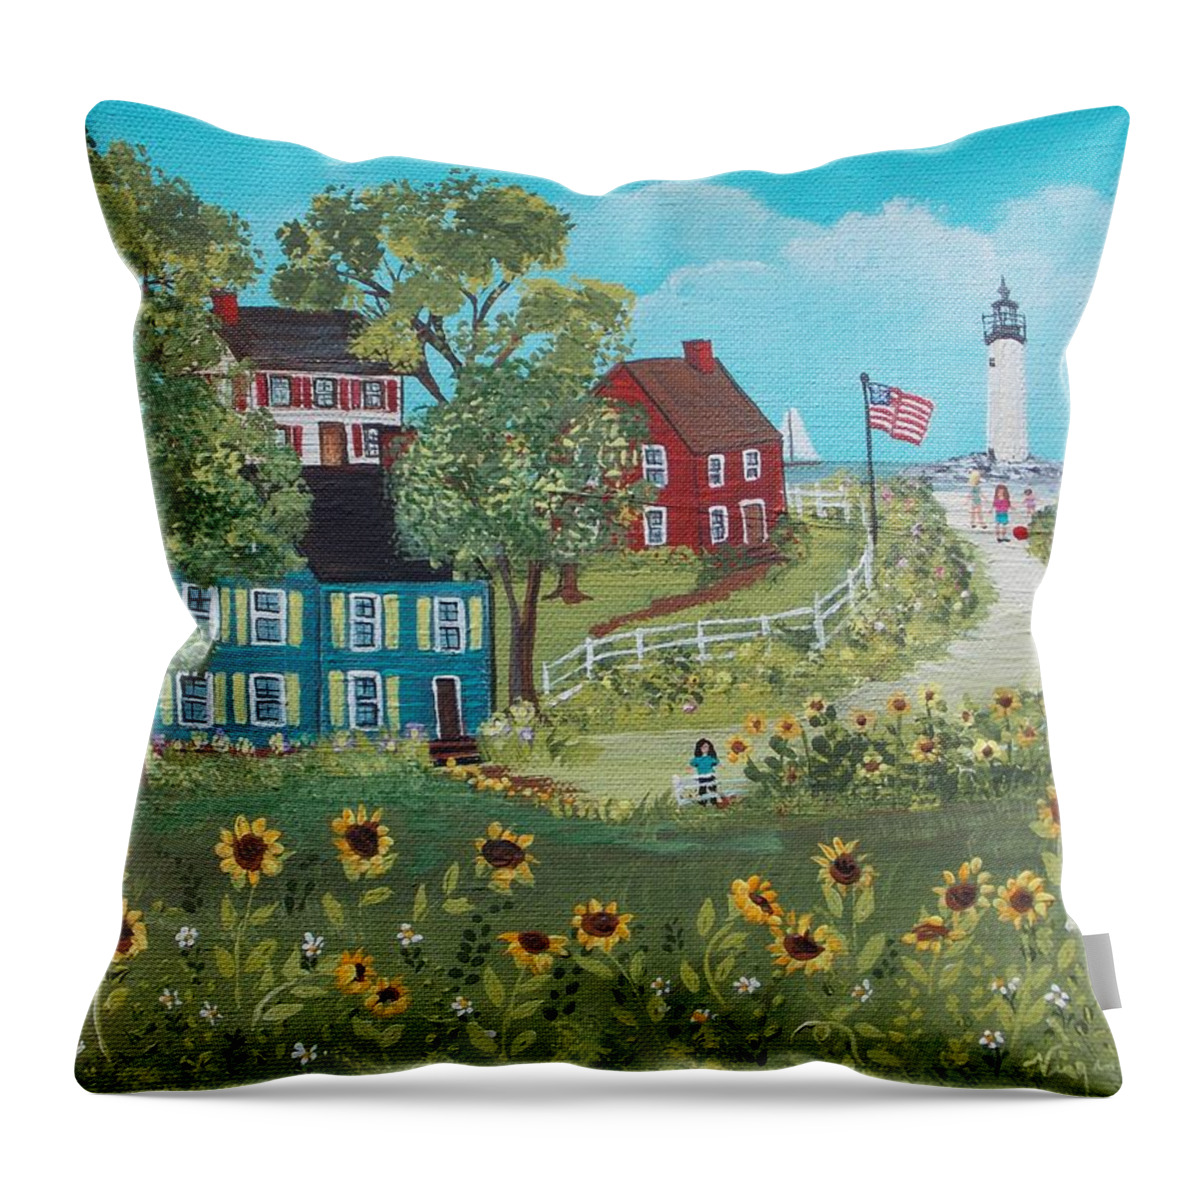 Folk Art Throw Pillow featuring the painting Late July by Virginia Coyle